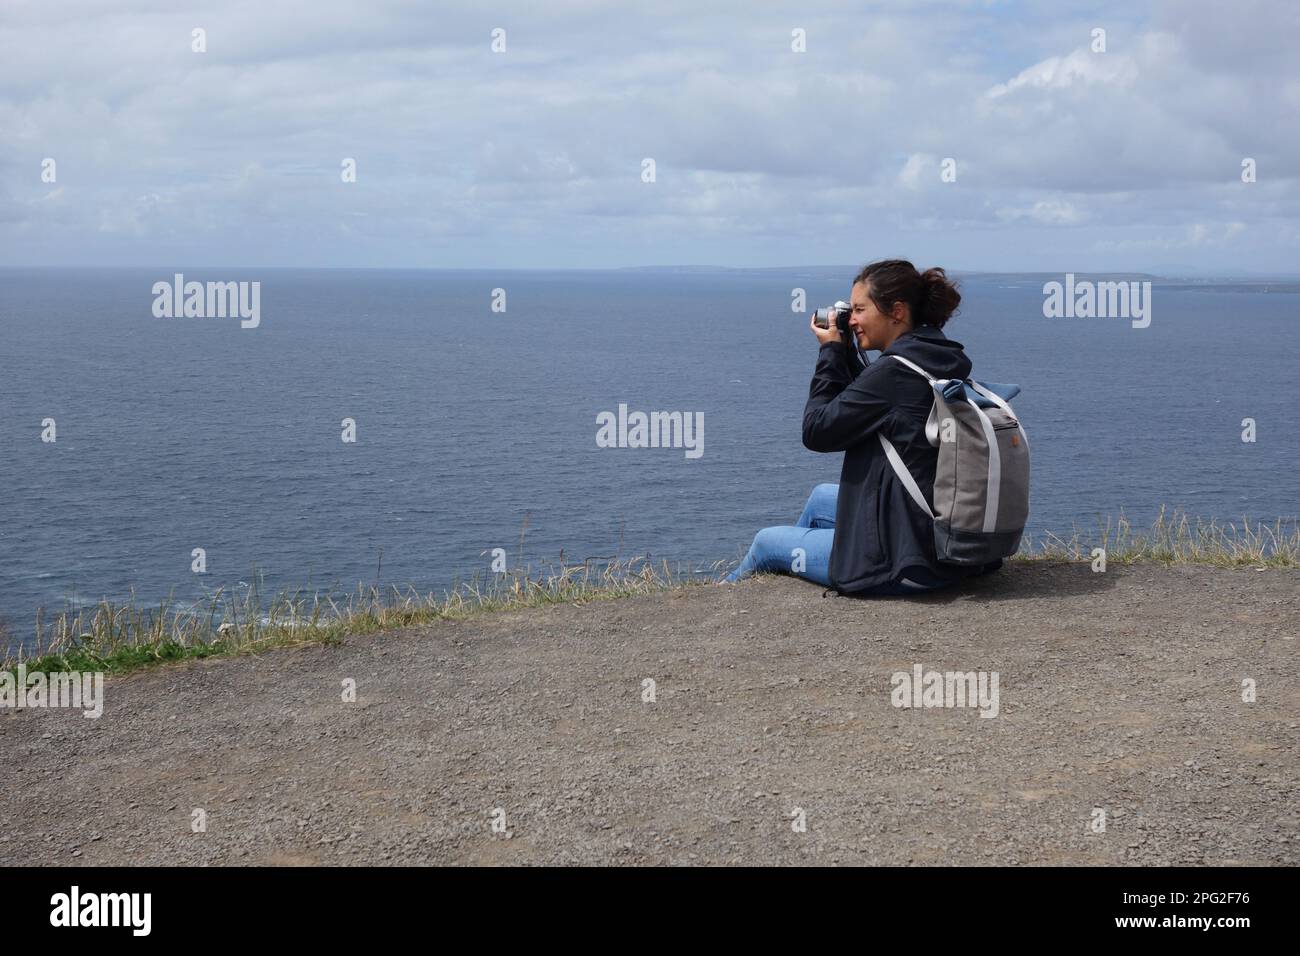 young woman taking photographs at Cliffs of Moher, ireland Stock Photo